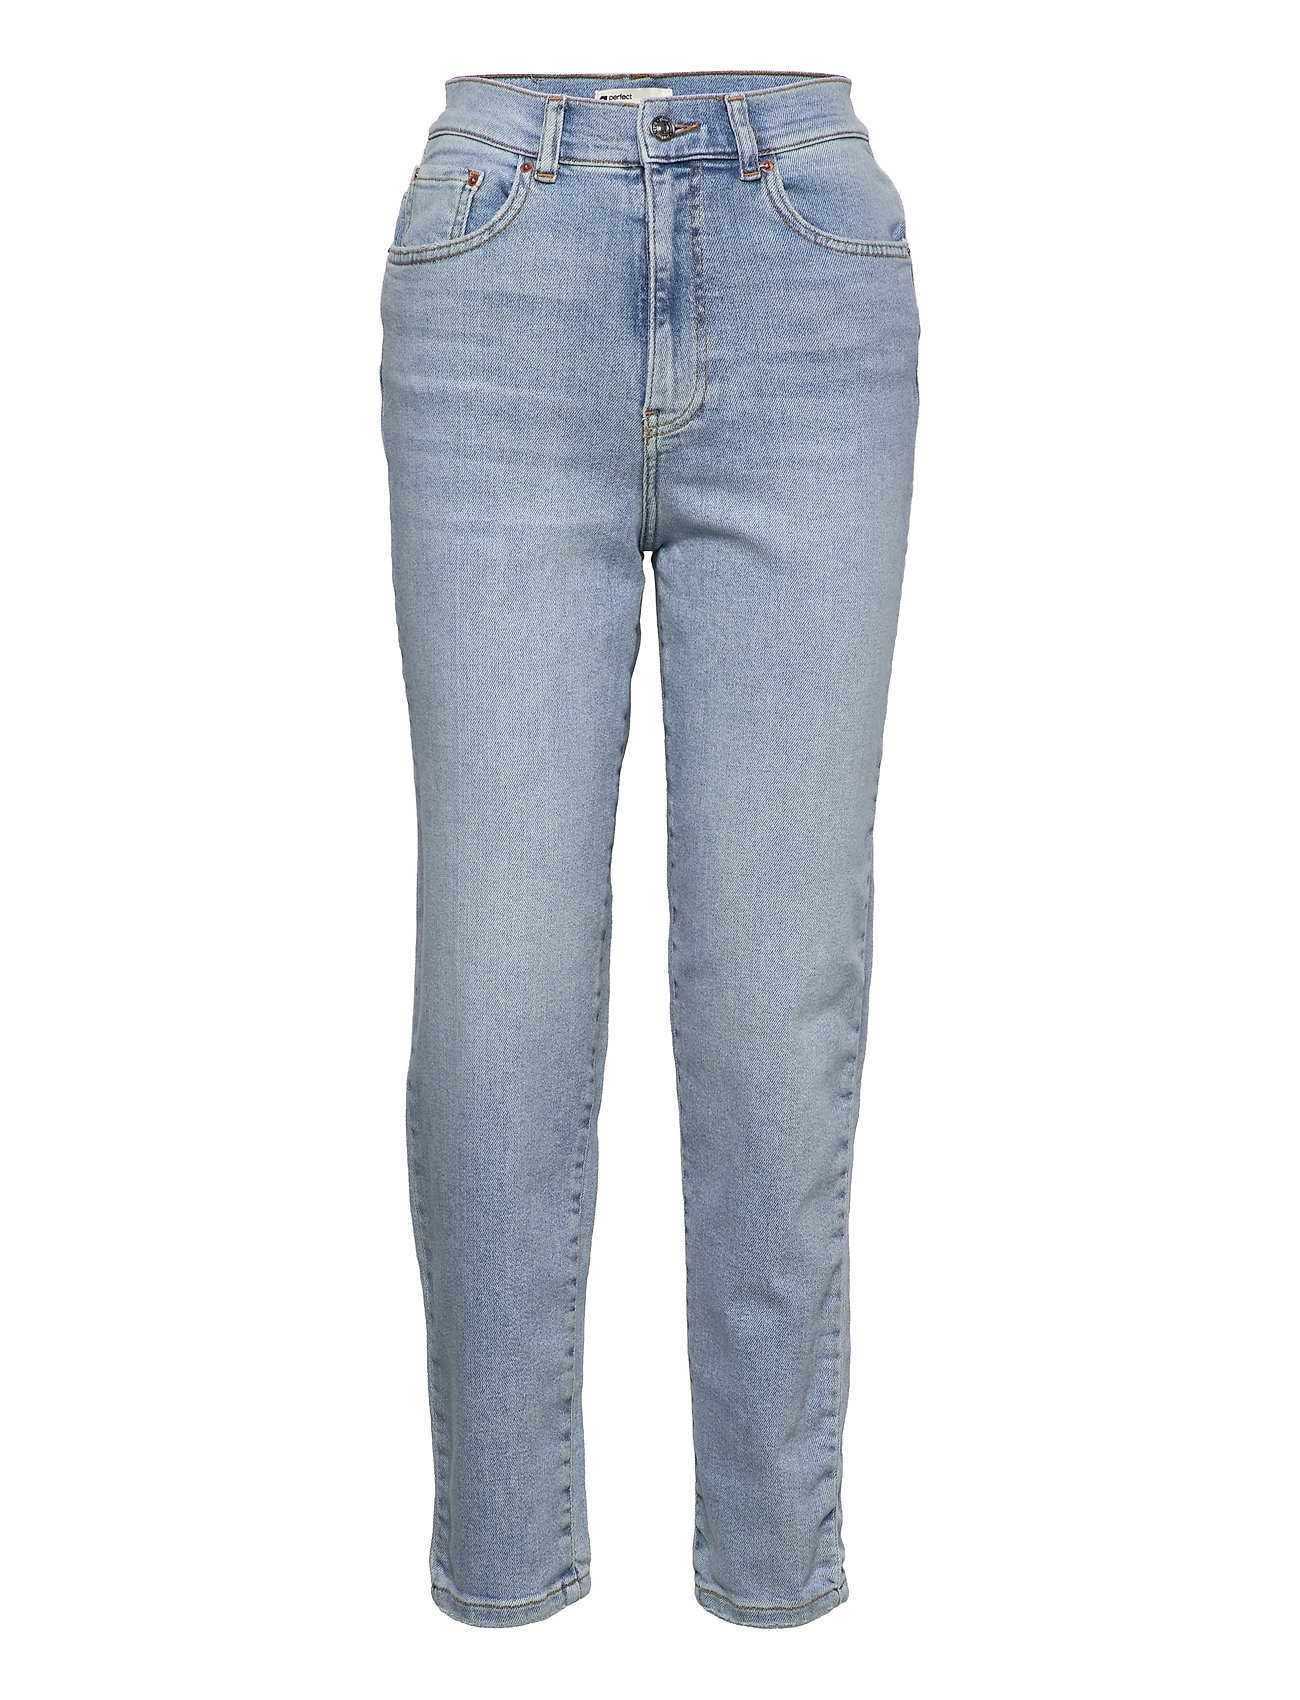 Tricot Jeans - jeans - Boozt.com